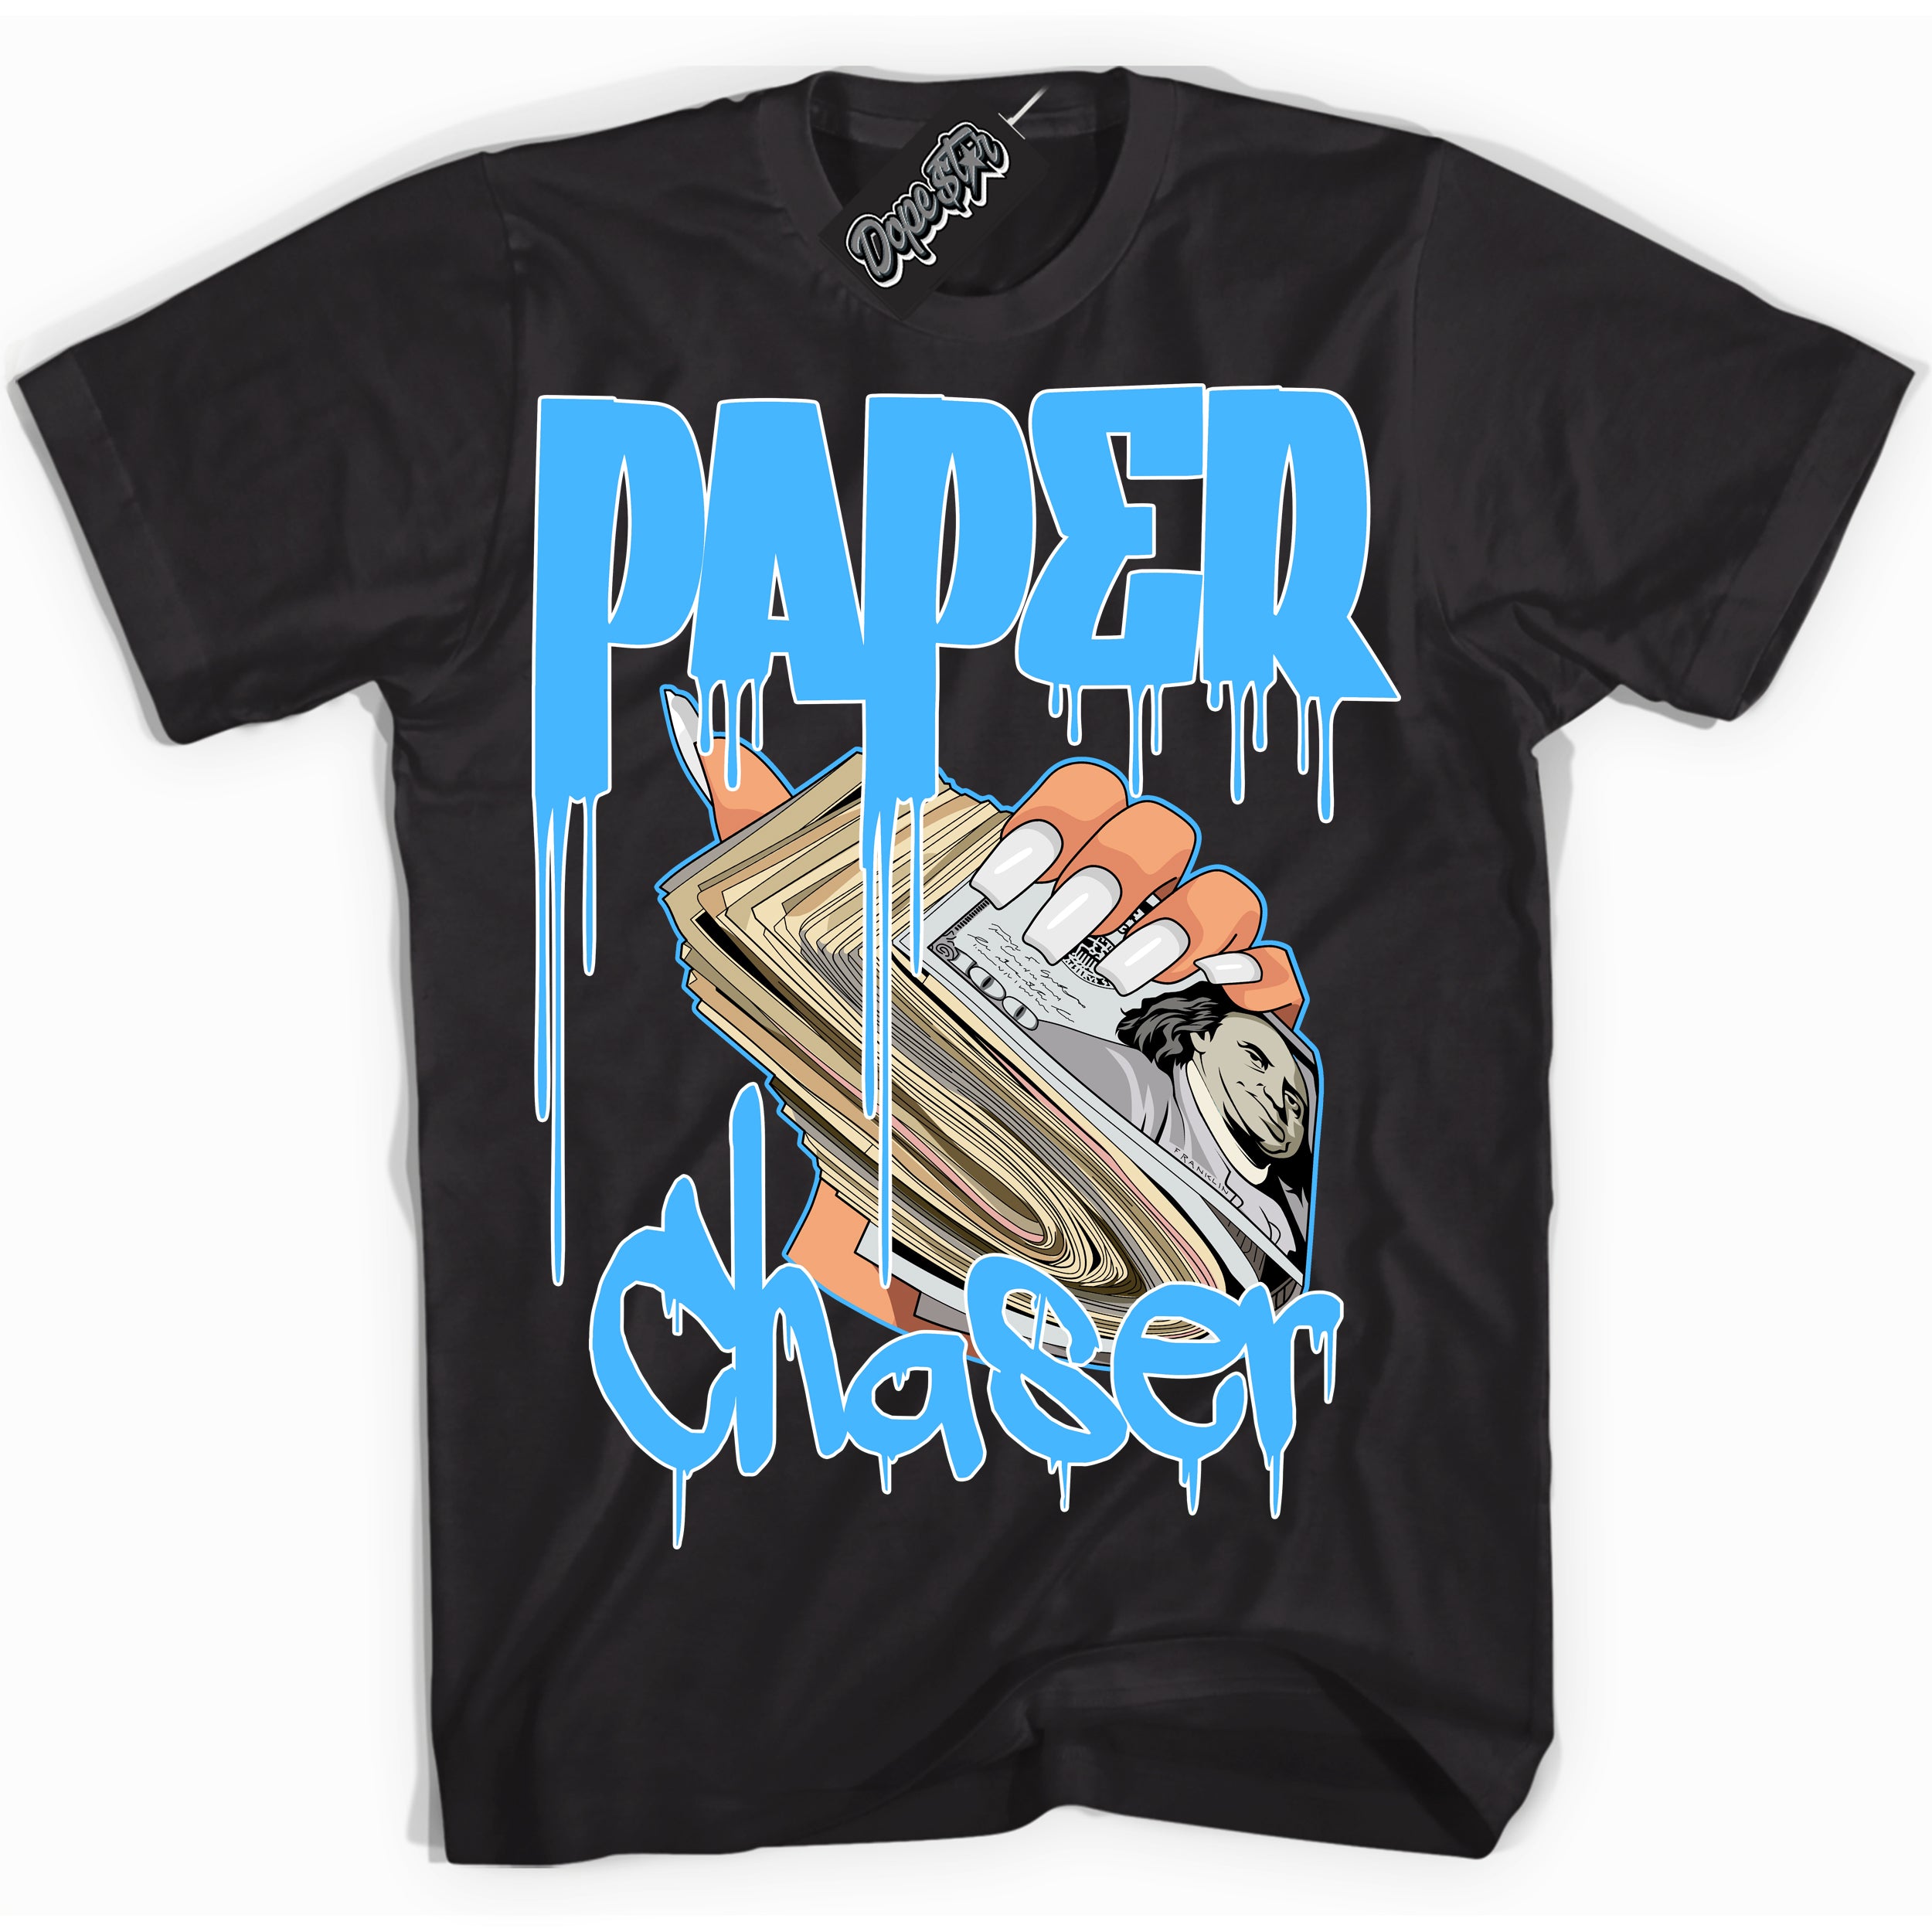 Cool Black graphic tee with “ Paper Chaser” design, that perfectly matches Powder Blue 9s sneakers 